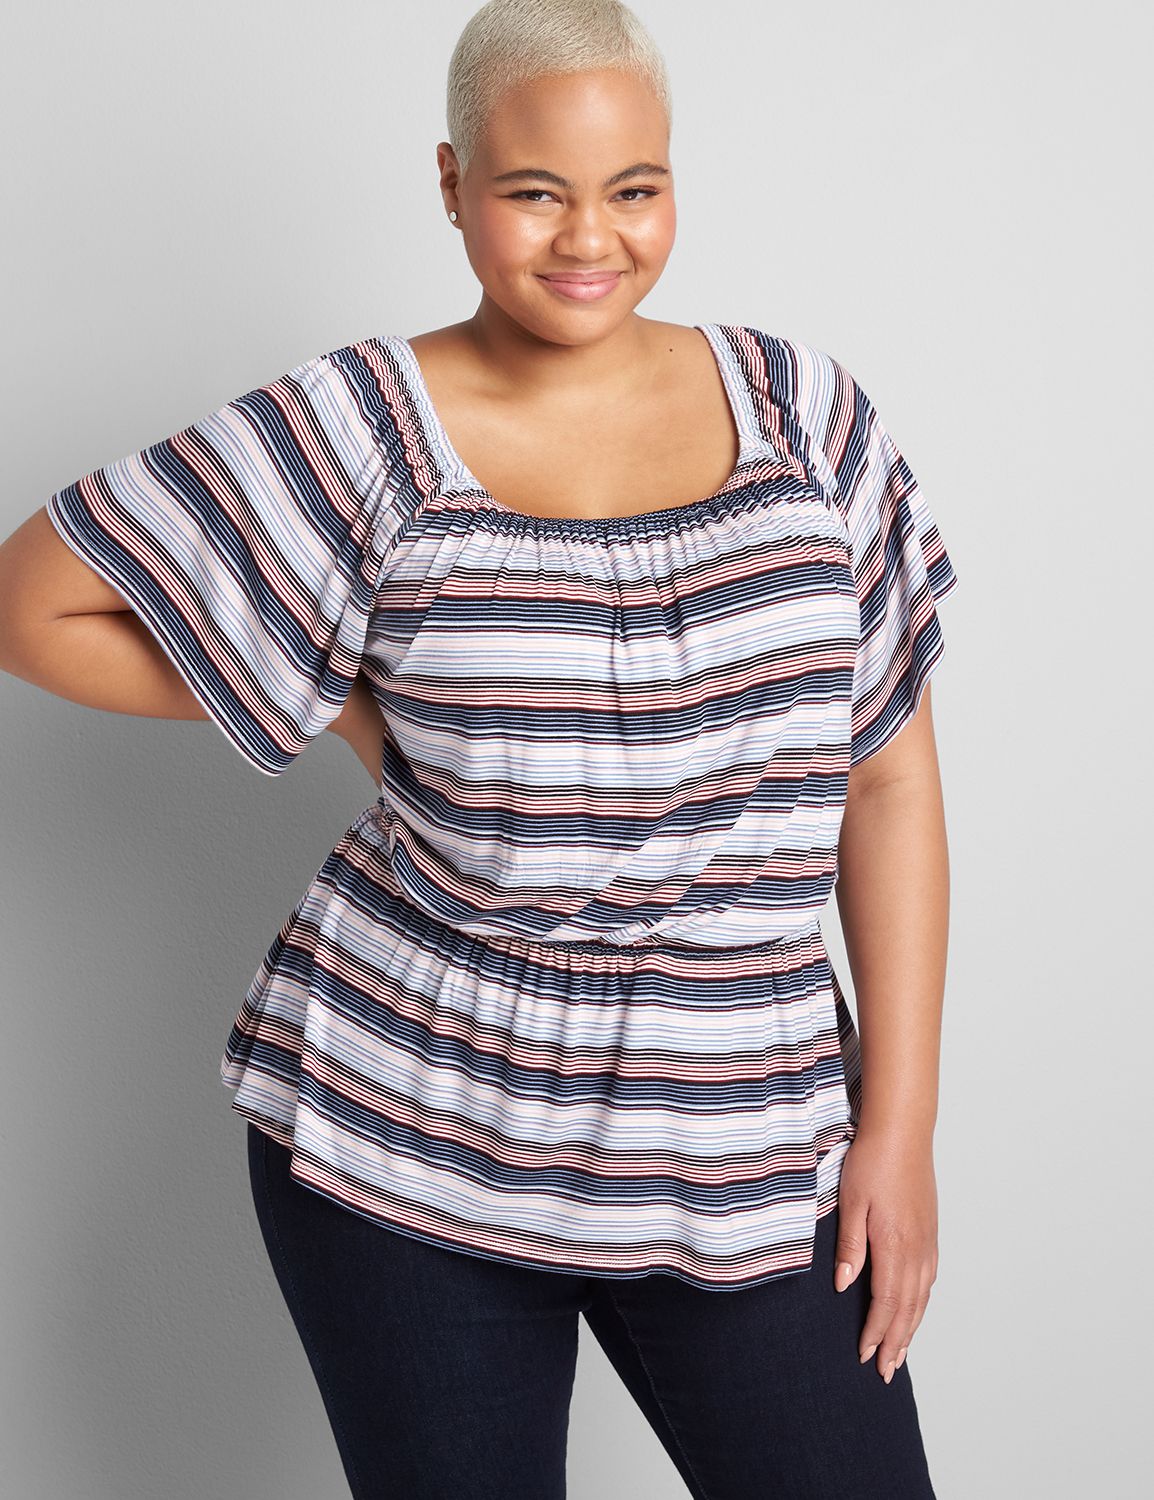 afsked Edition Effektivt Clearance Plus Size Tops & Tees - On Sale Today | Lane Bryant